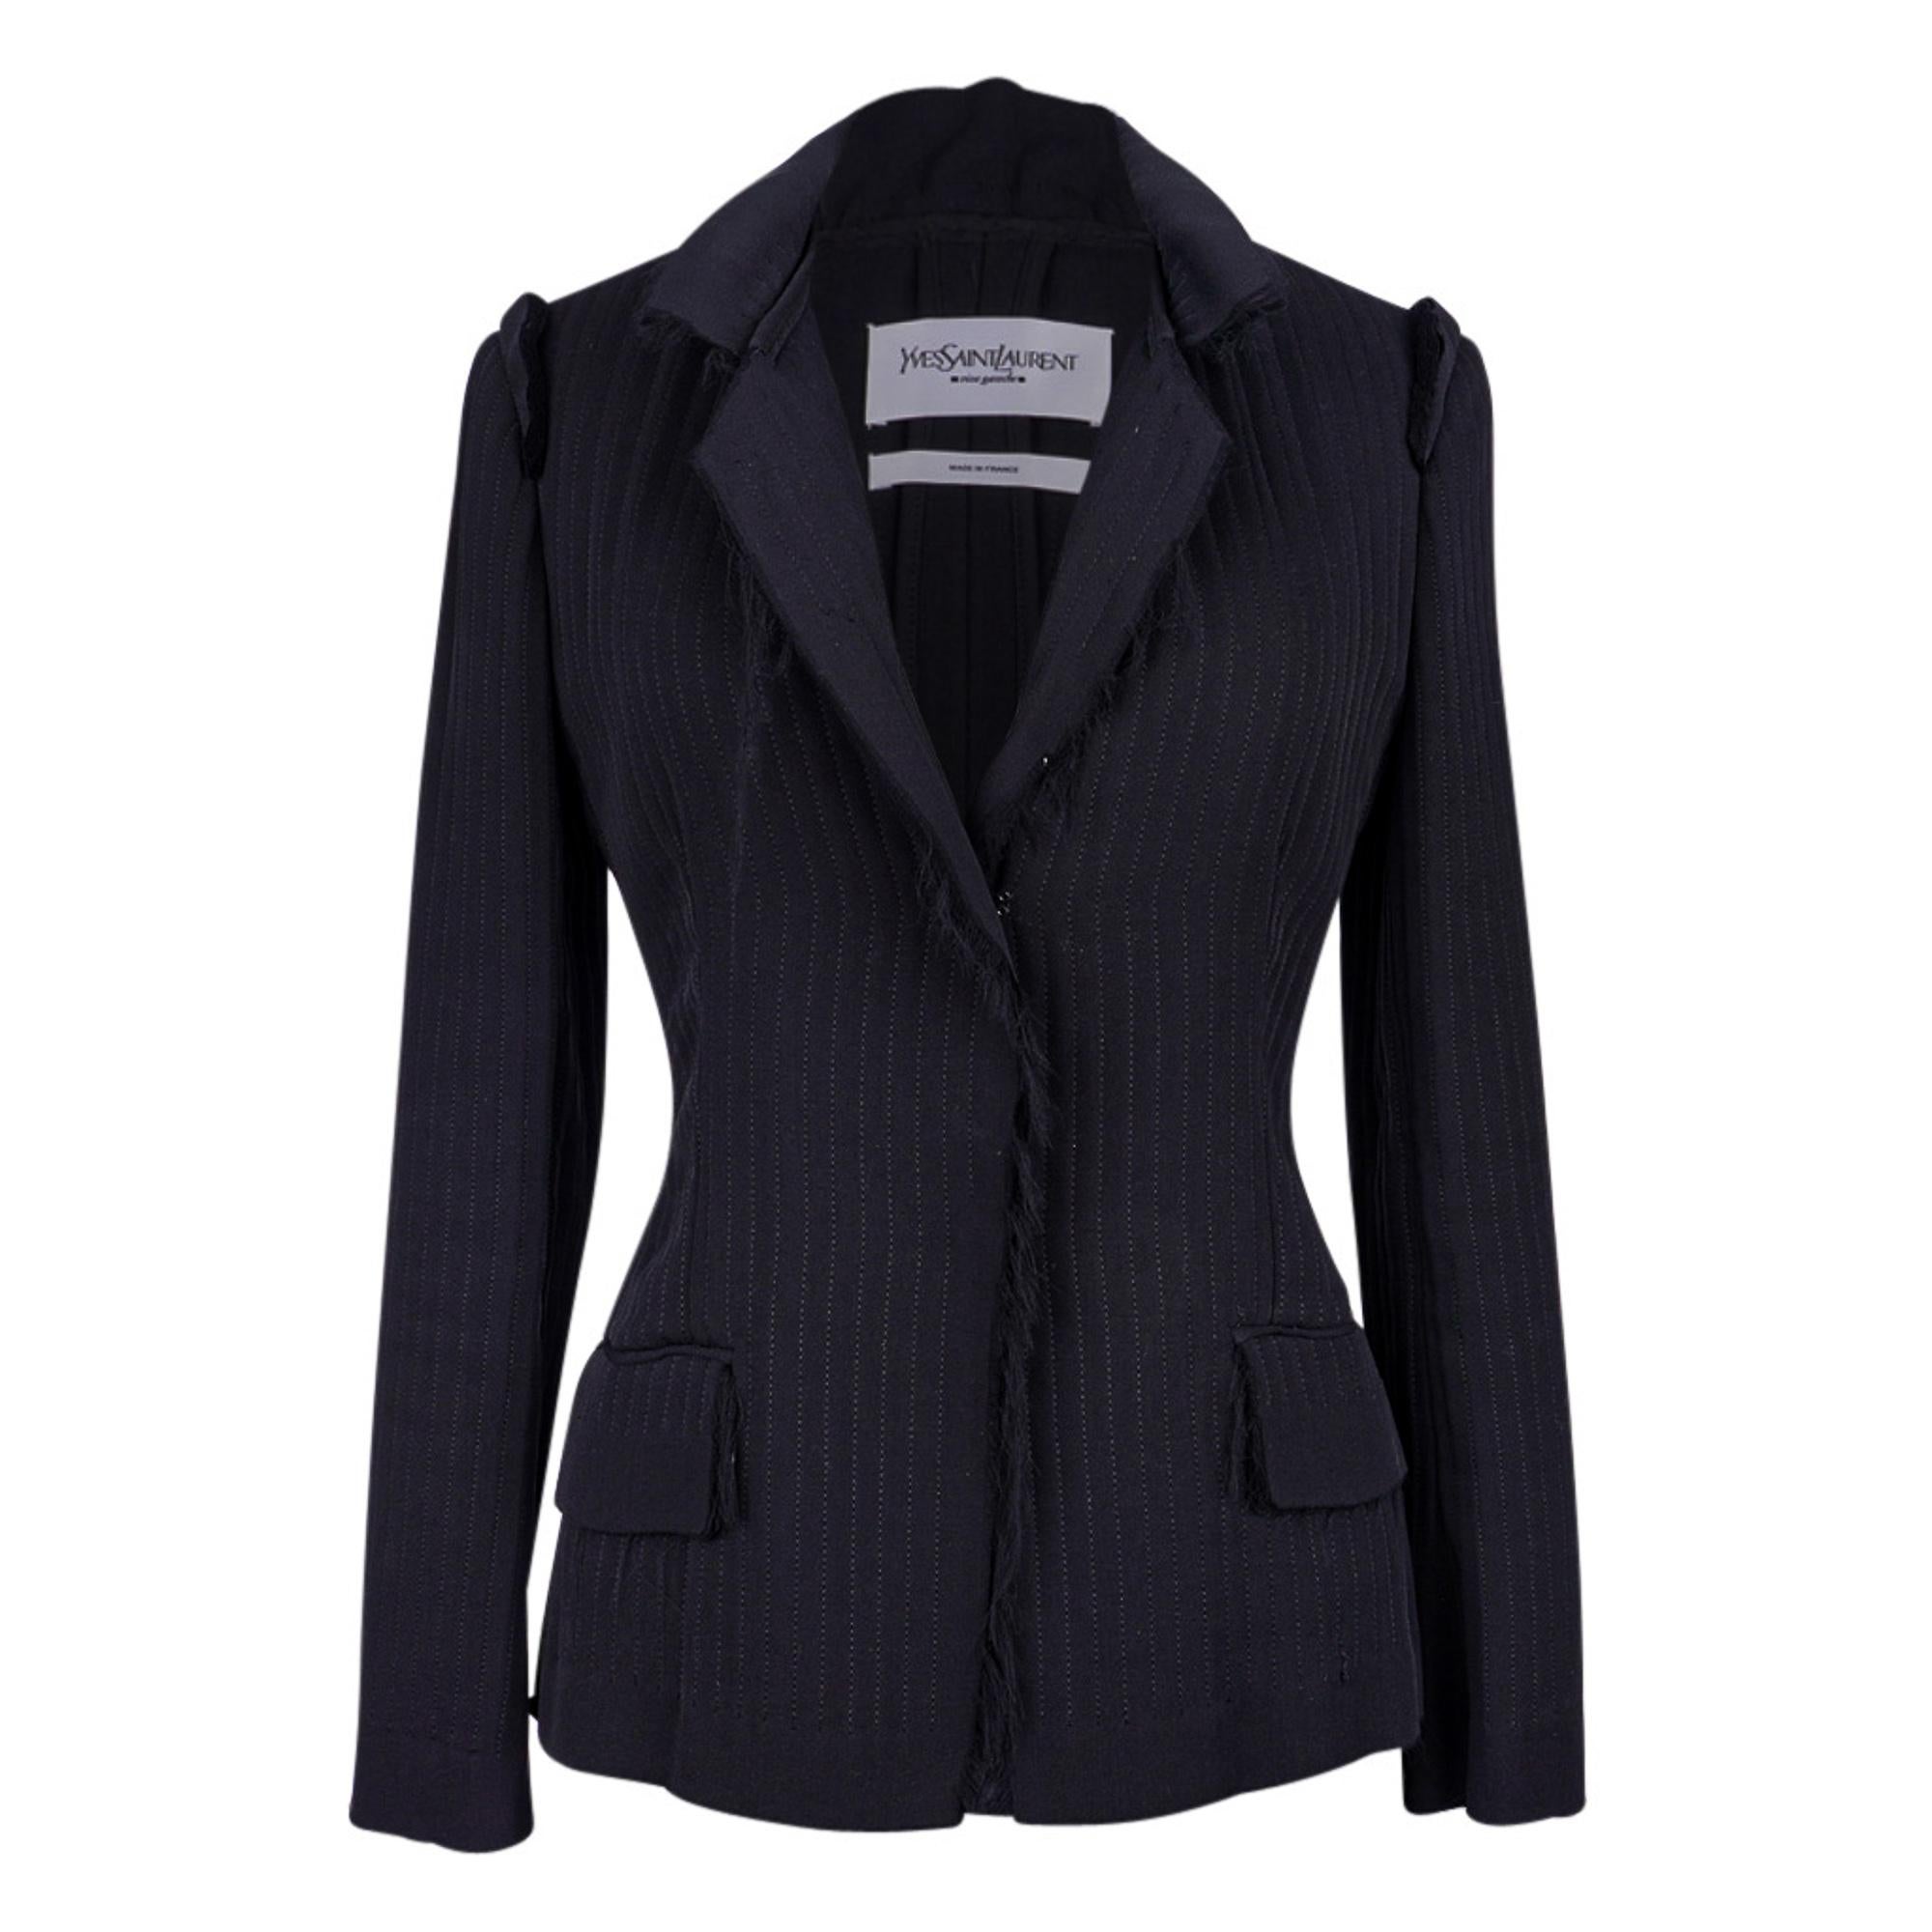 Yves Saint Laurent Jacket Exquisite Tom Ford Creation in Layers 36 4